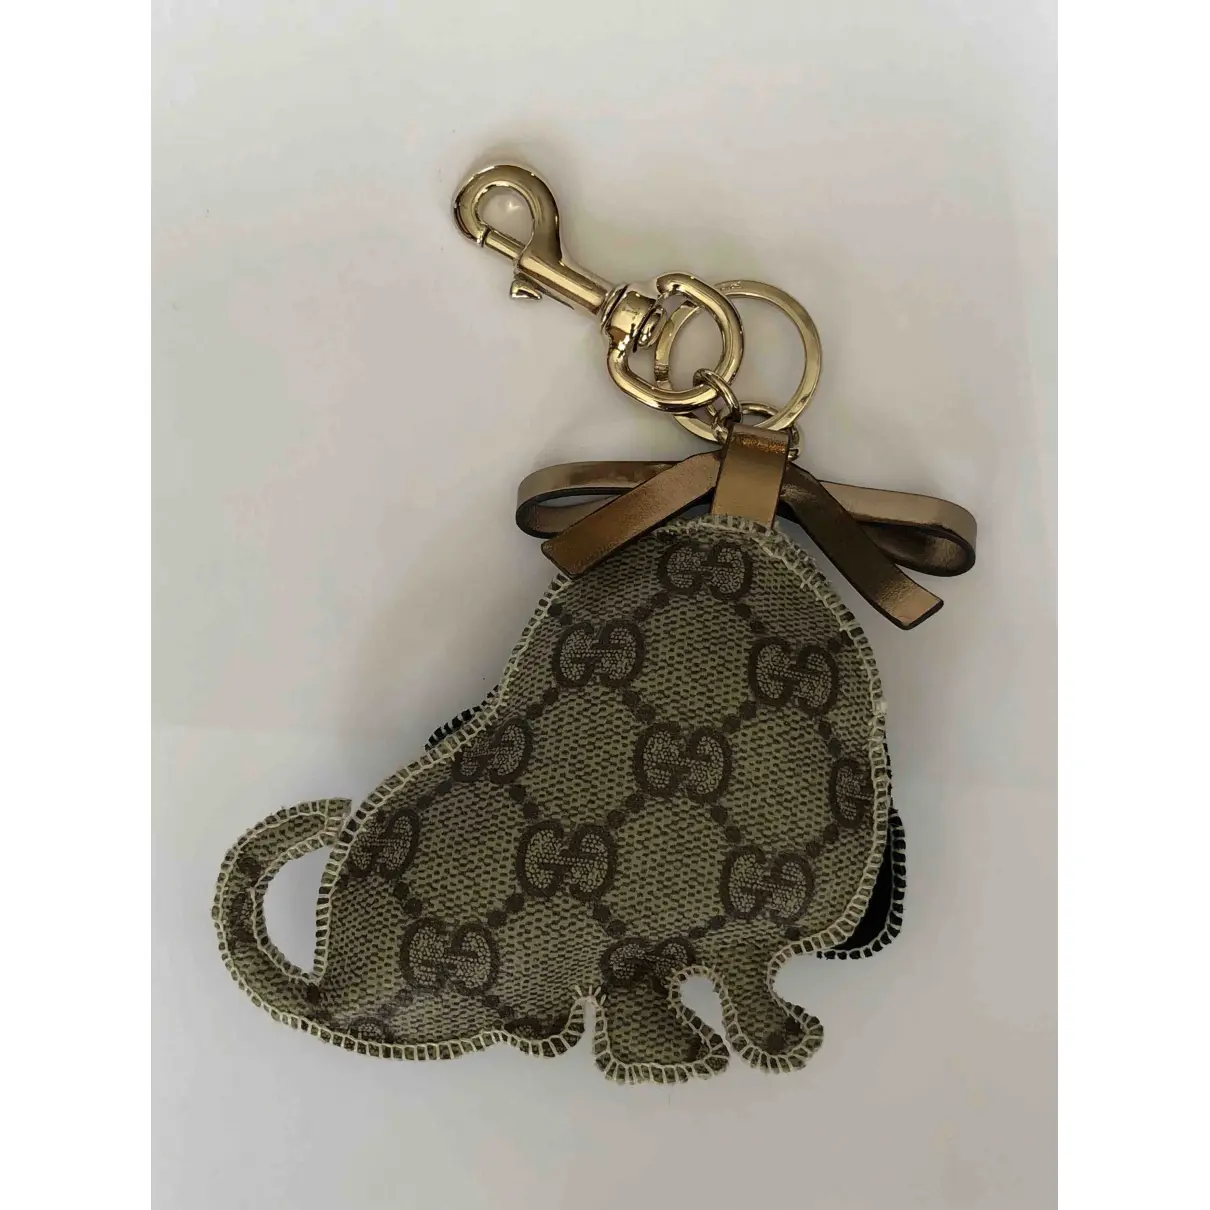 Buy Gucci Leather bag charm online